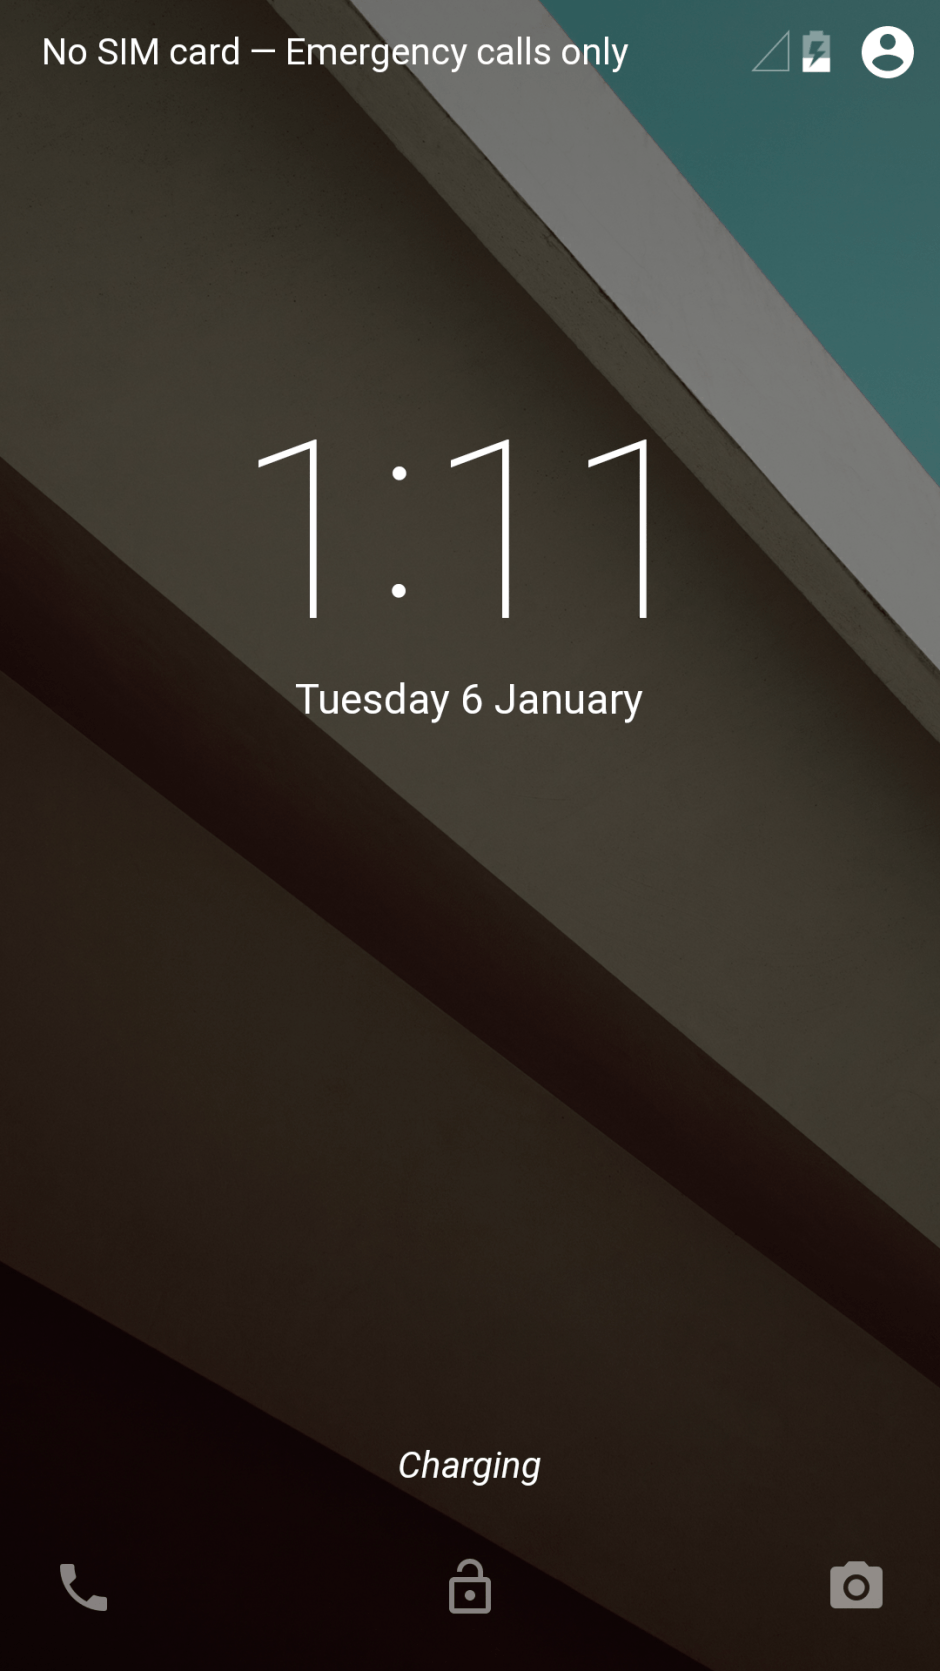 The new lockscreen in Android L